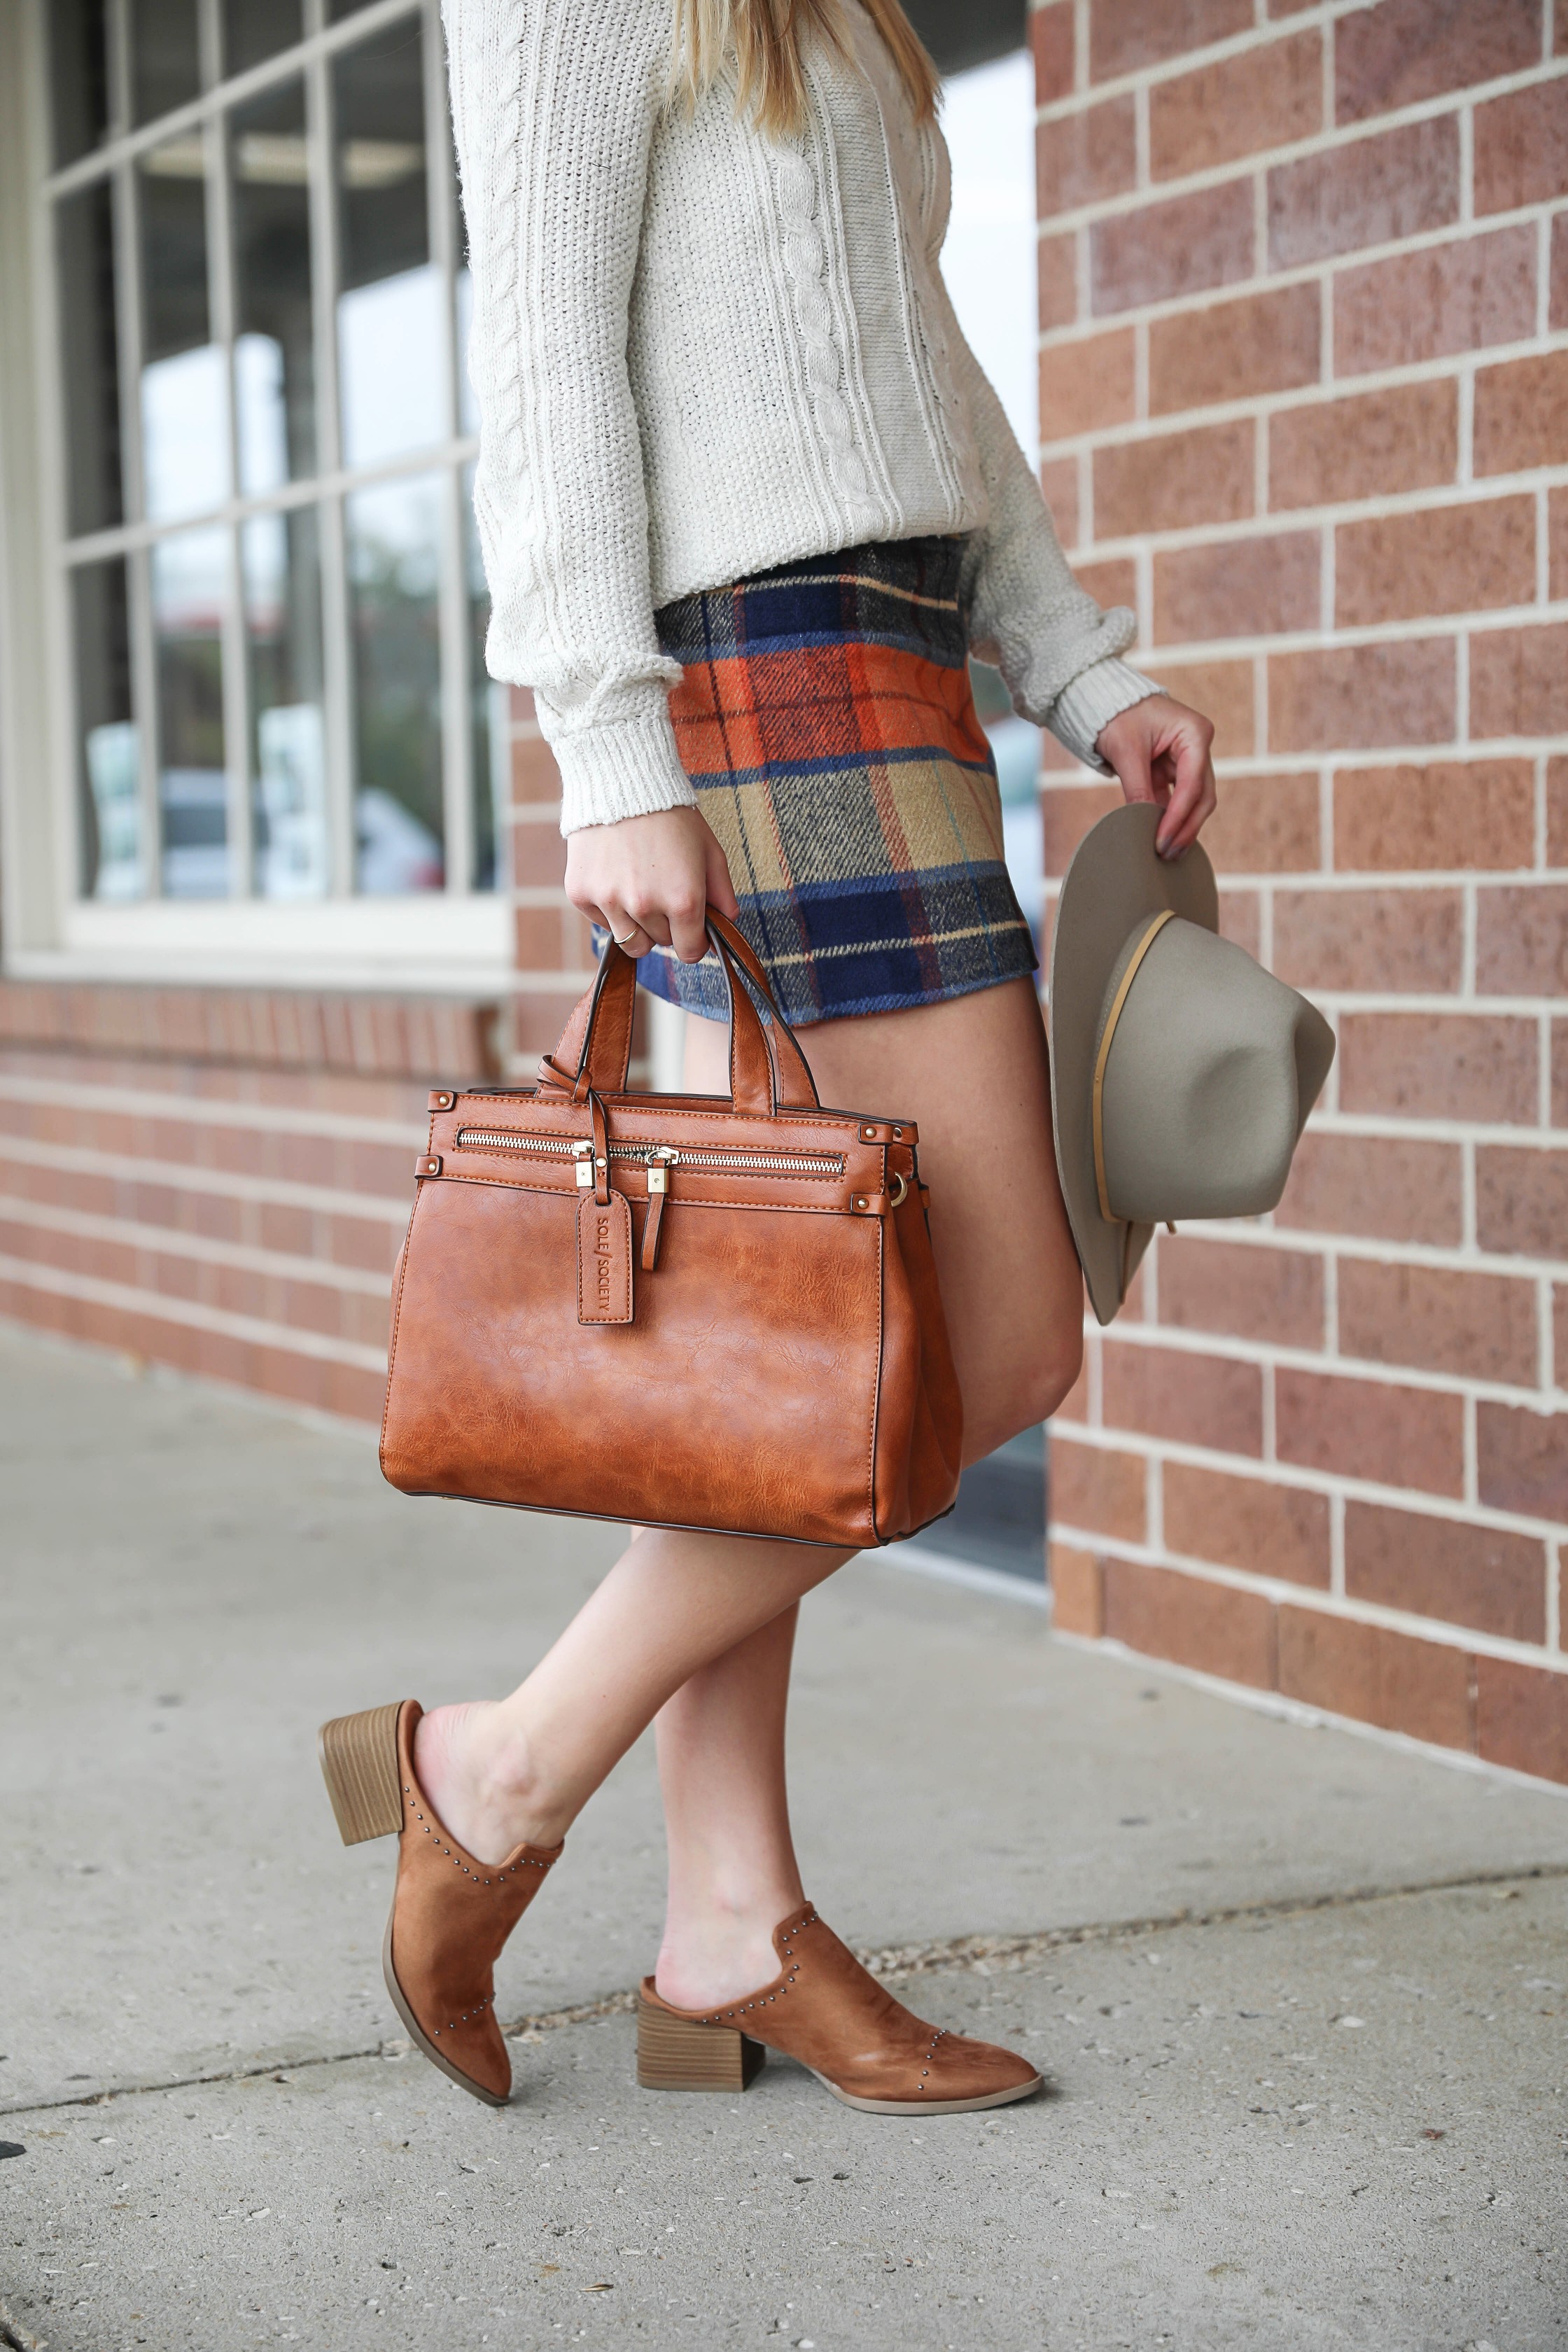 Plaid skirt with a cute cream knit off the shoulder sweater! The cutest fall outfit with a fun faux leather bag! Cute Abercrombie and Fitch and Lulu's fashion! Details on fashion blog daily dose of charm by Lauren Lindmark